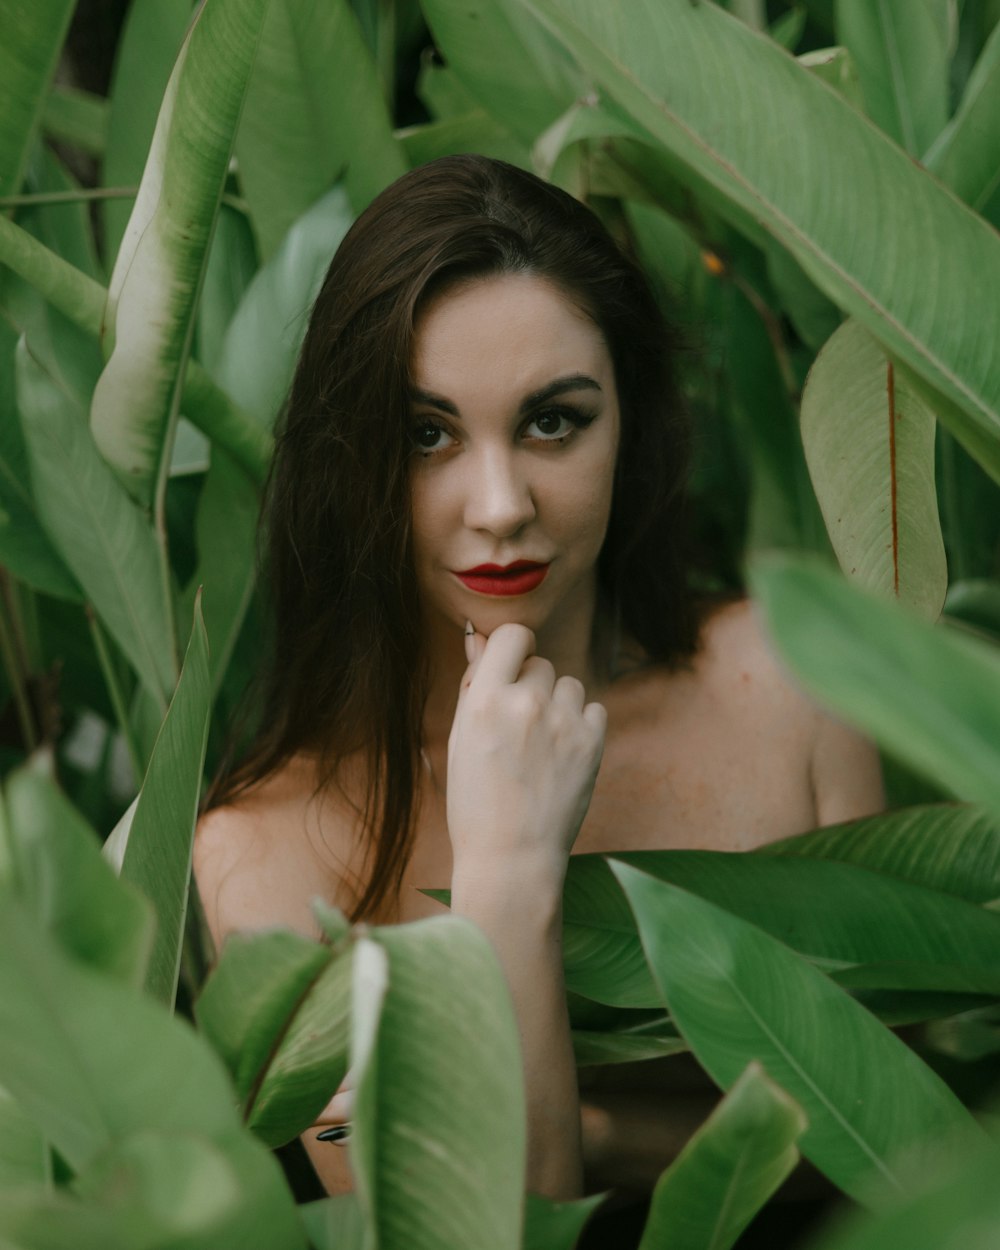 a woman with red lipstick standing in a field of leaves